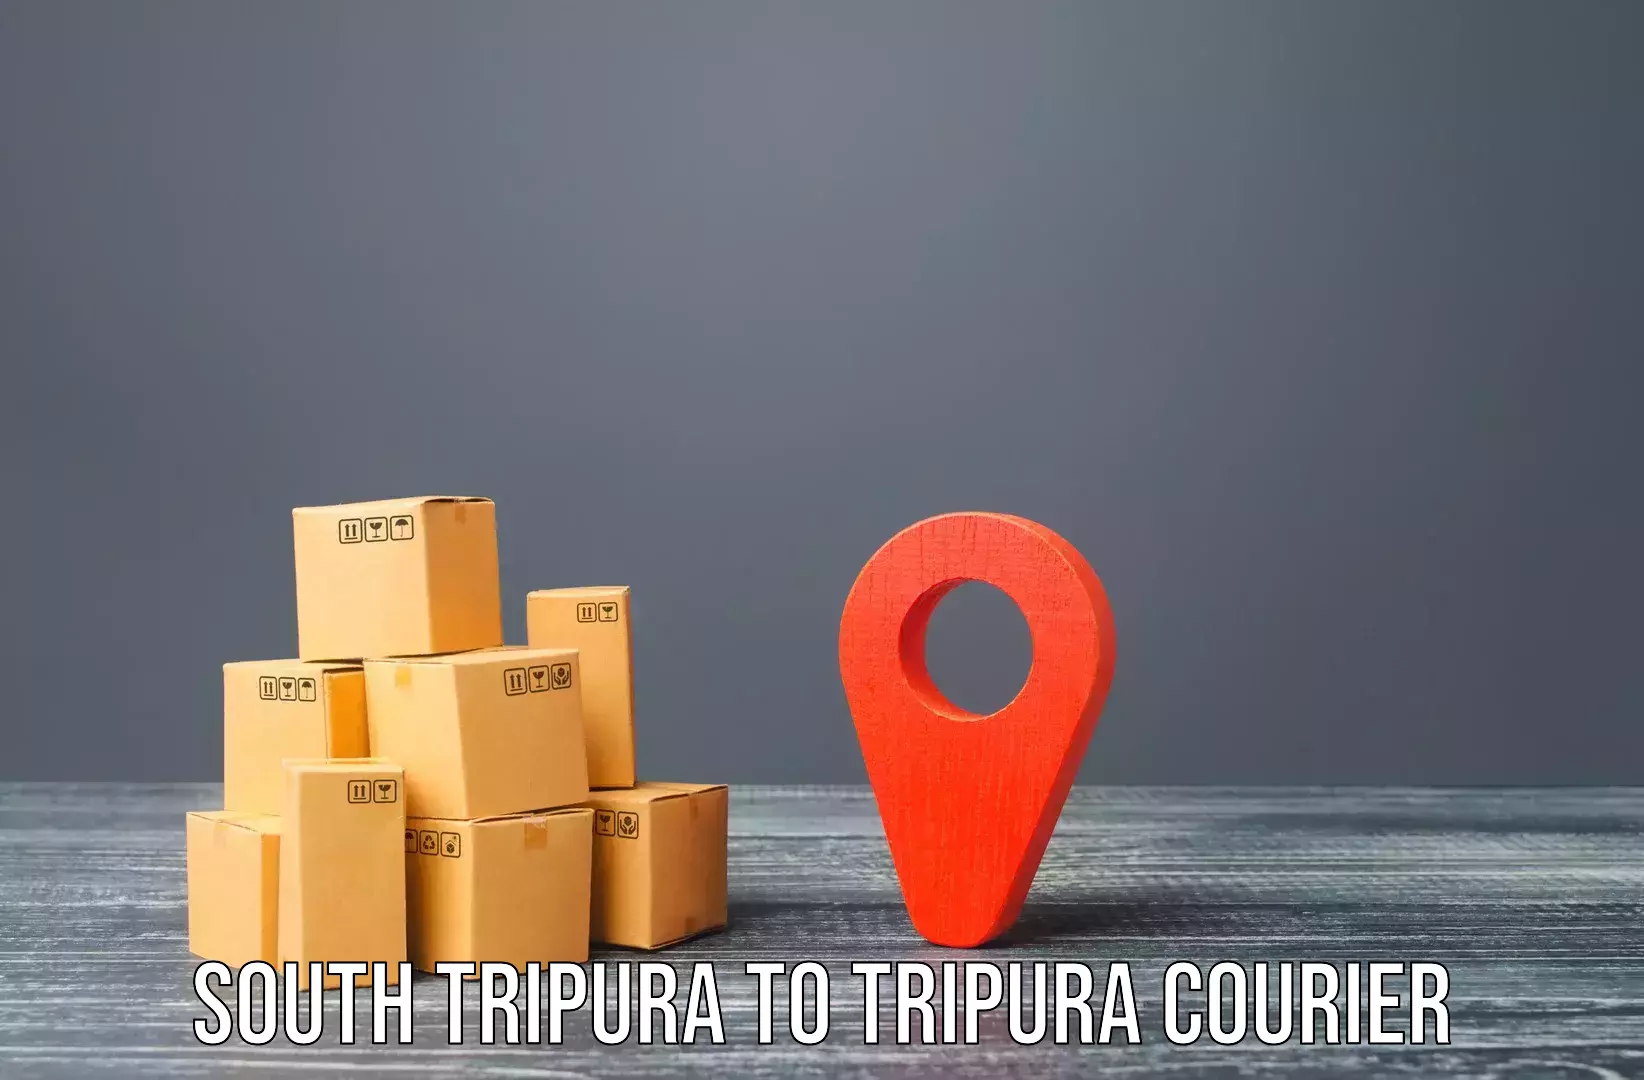 Quality moving services in South Tripura to South Tripura